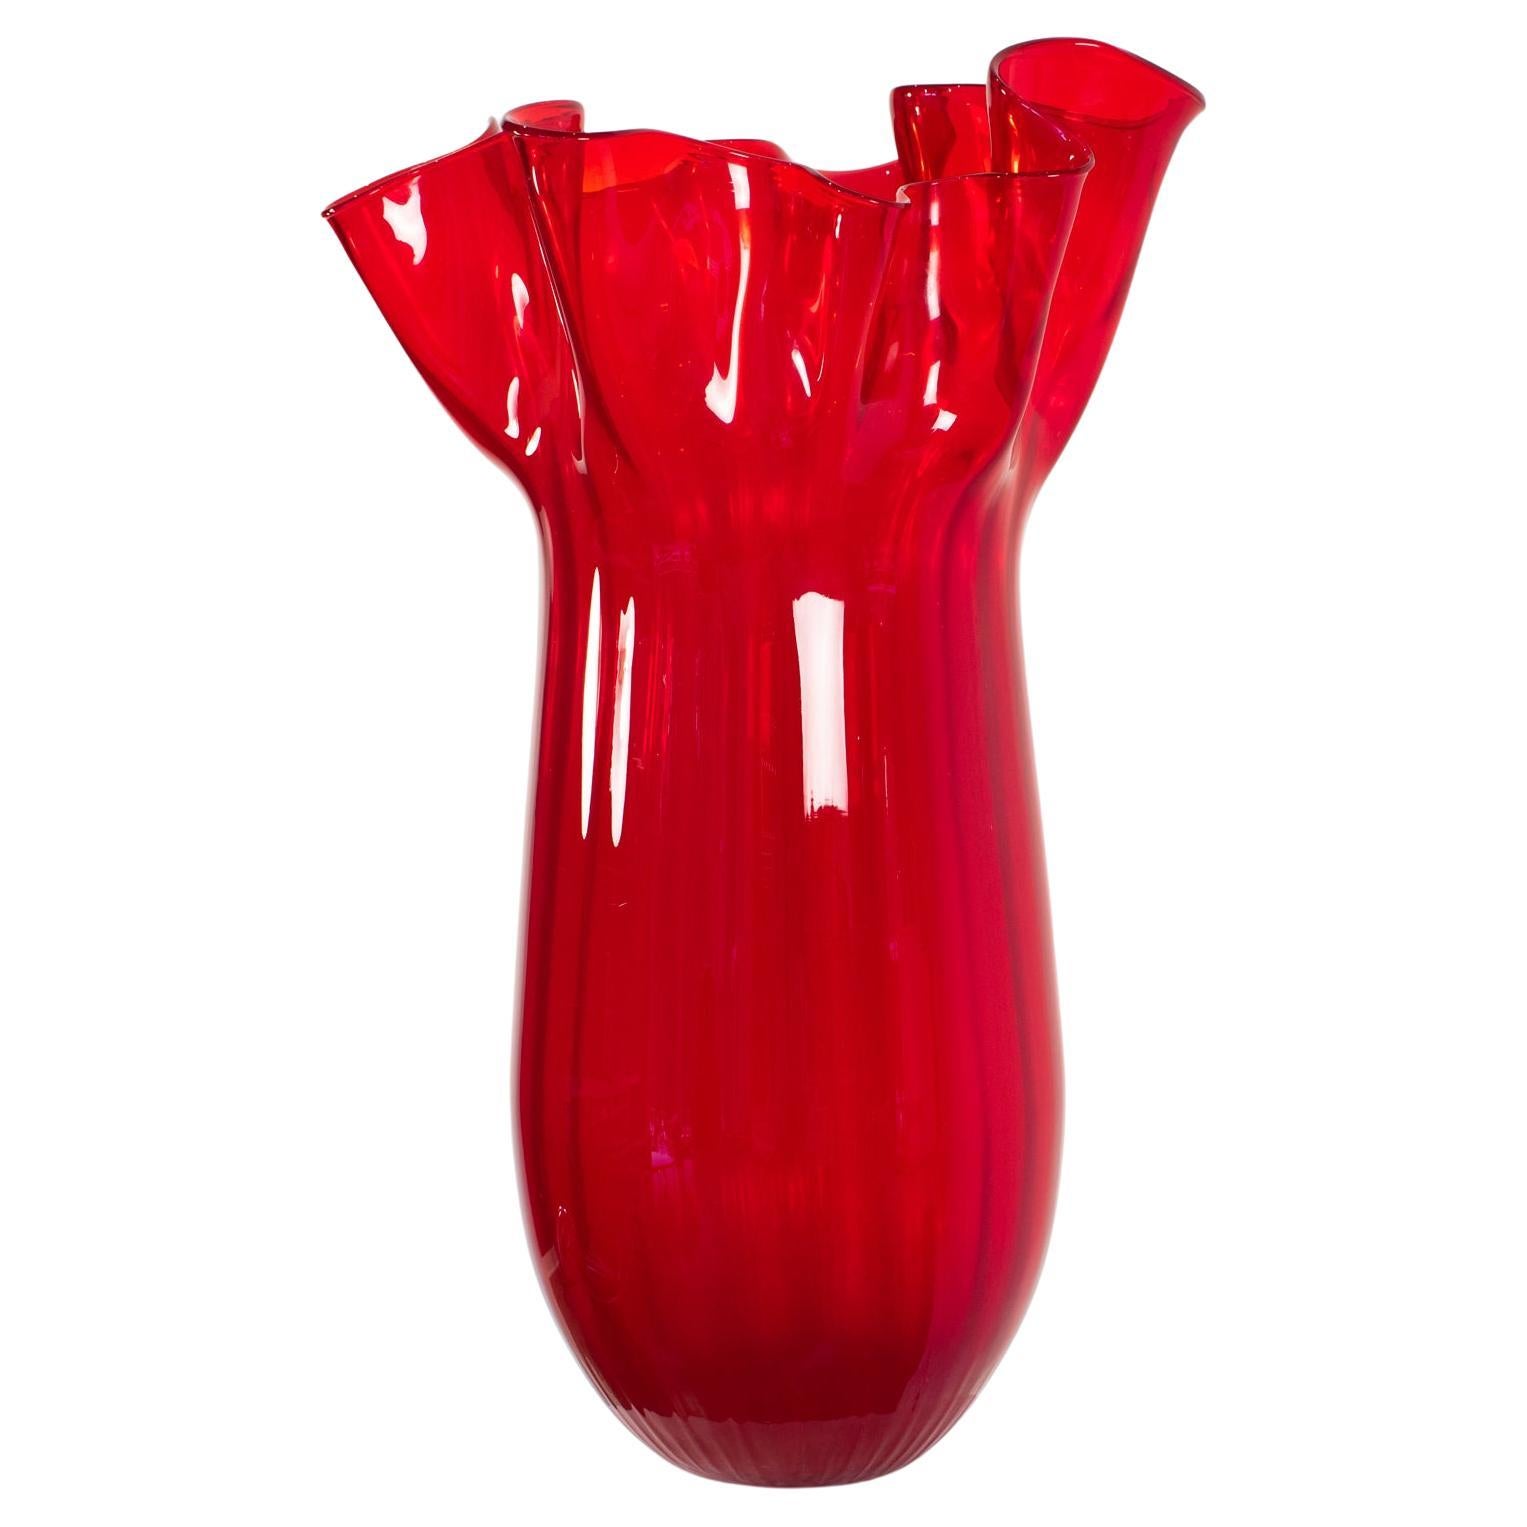 This spectacular and beautiful hand-blown Italian Art glass vase was designed by Venini, Murano. The extra tall sculptural amphora shape has scalloped 